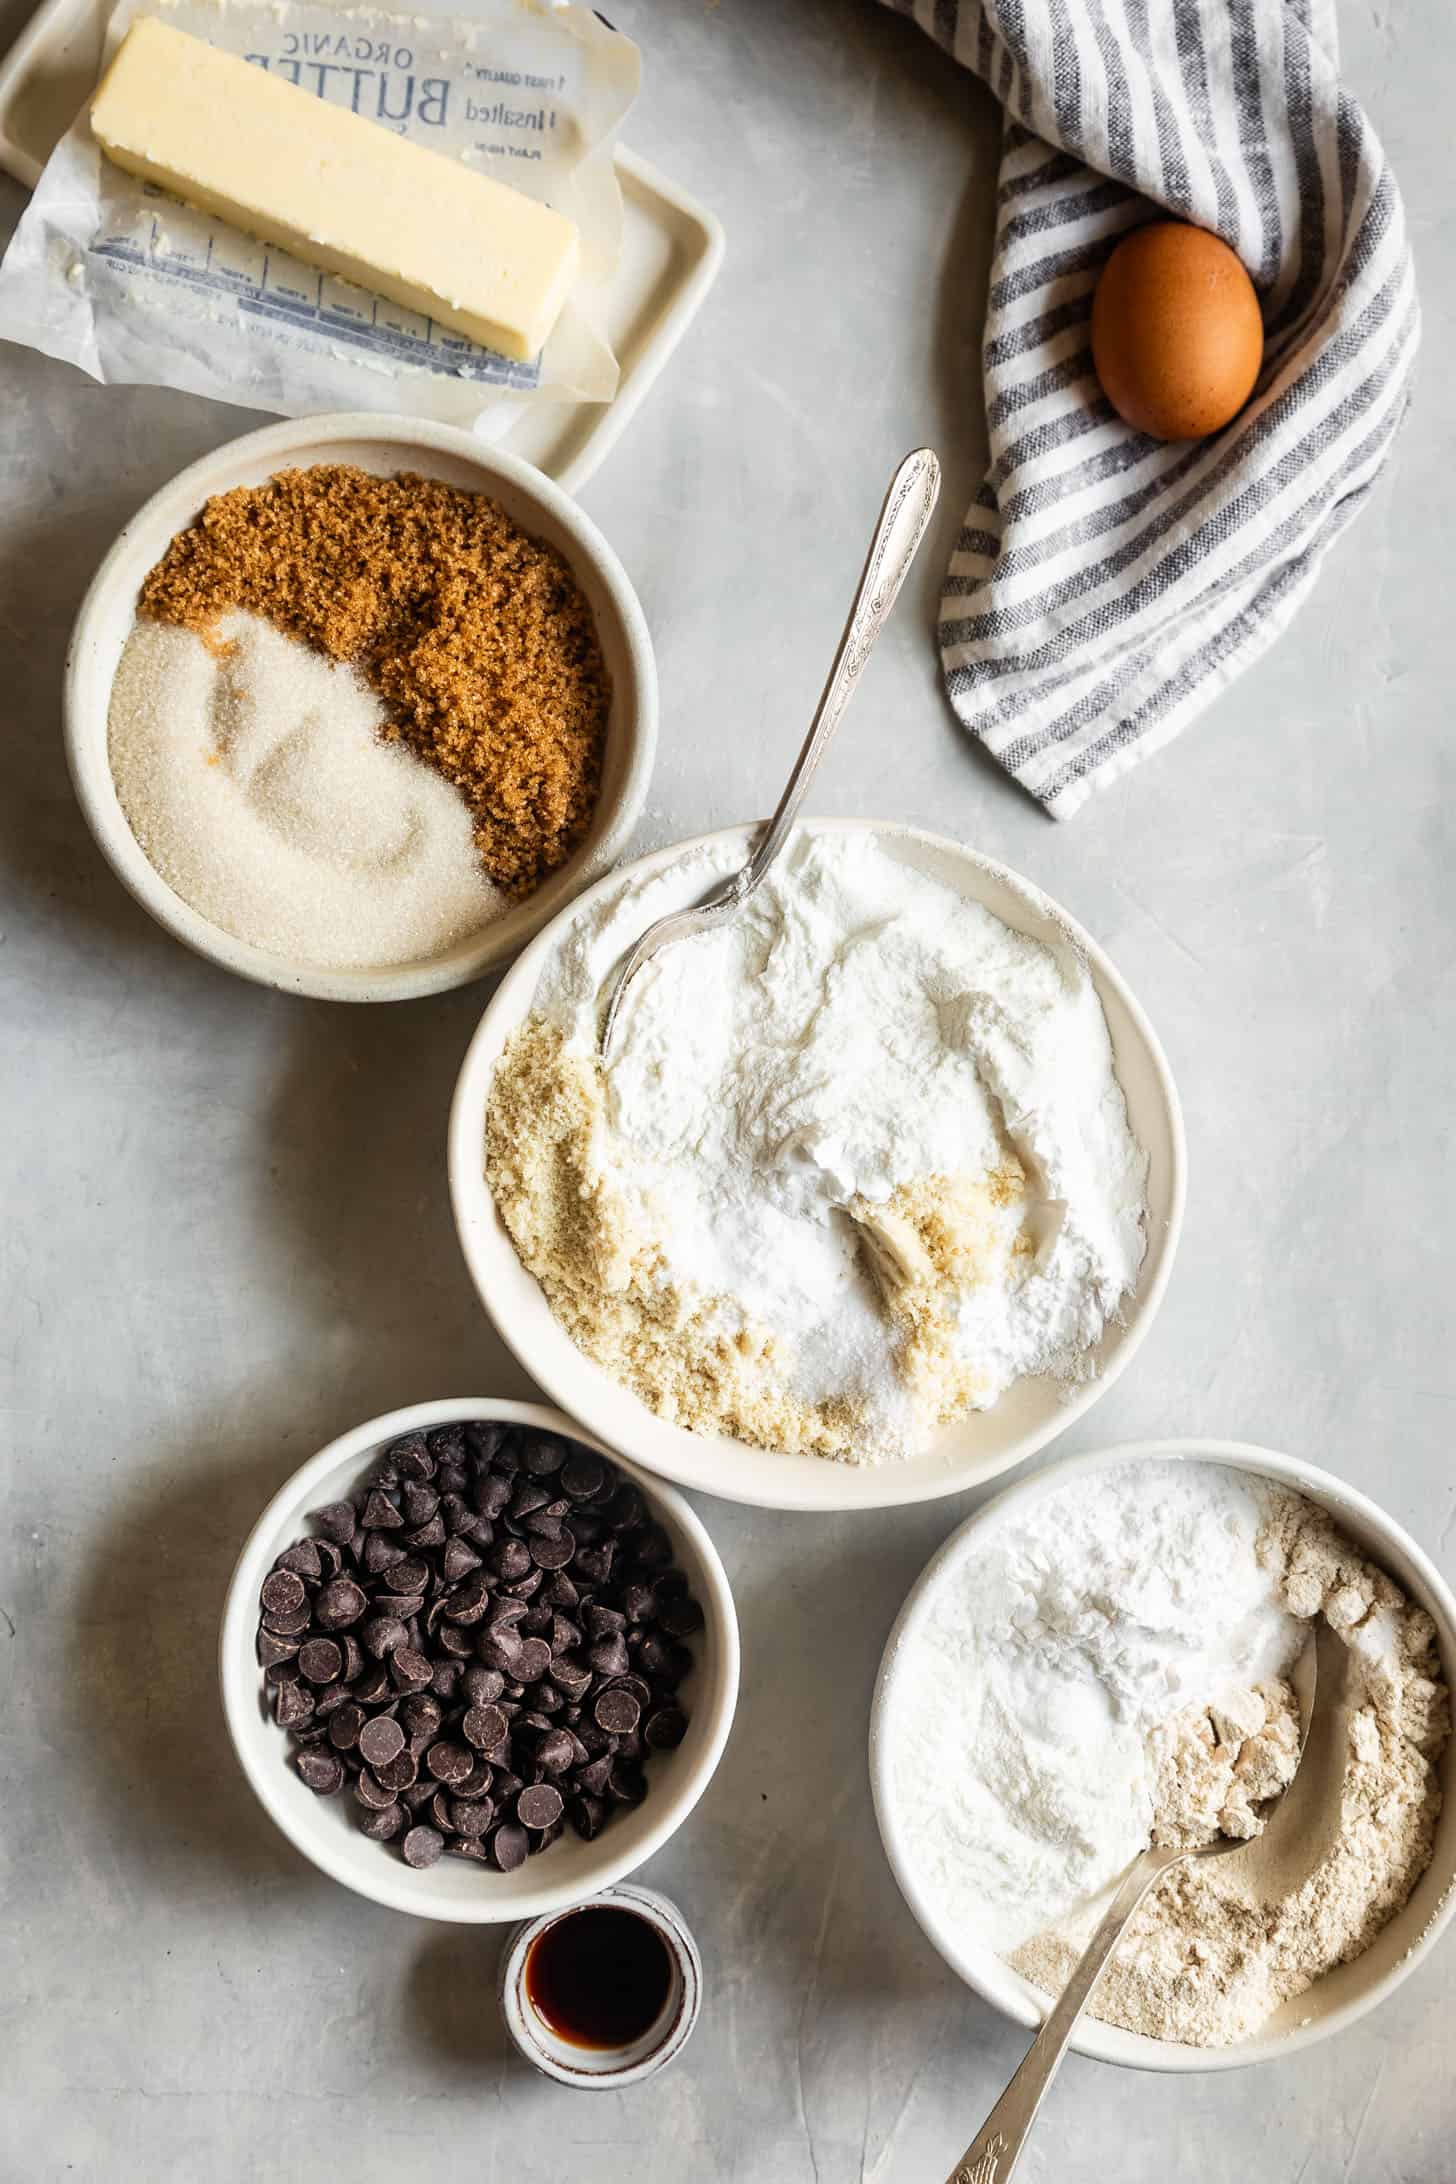 Ingredients for Gluten-Free Chocolate Chip Cookie Recipe